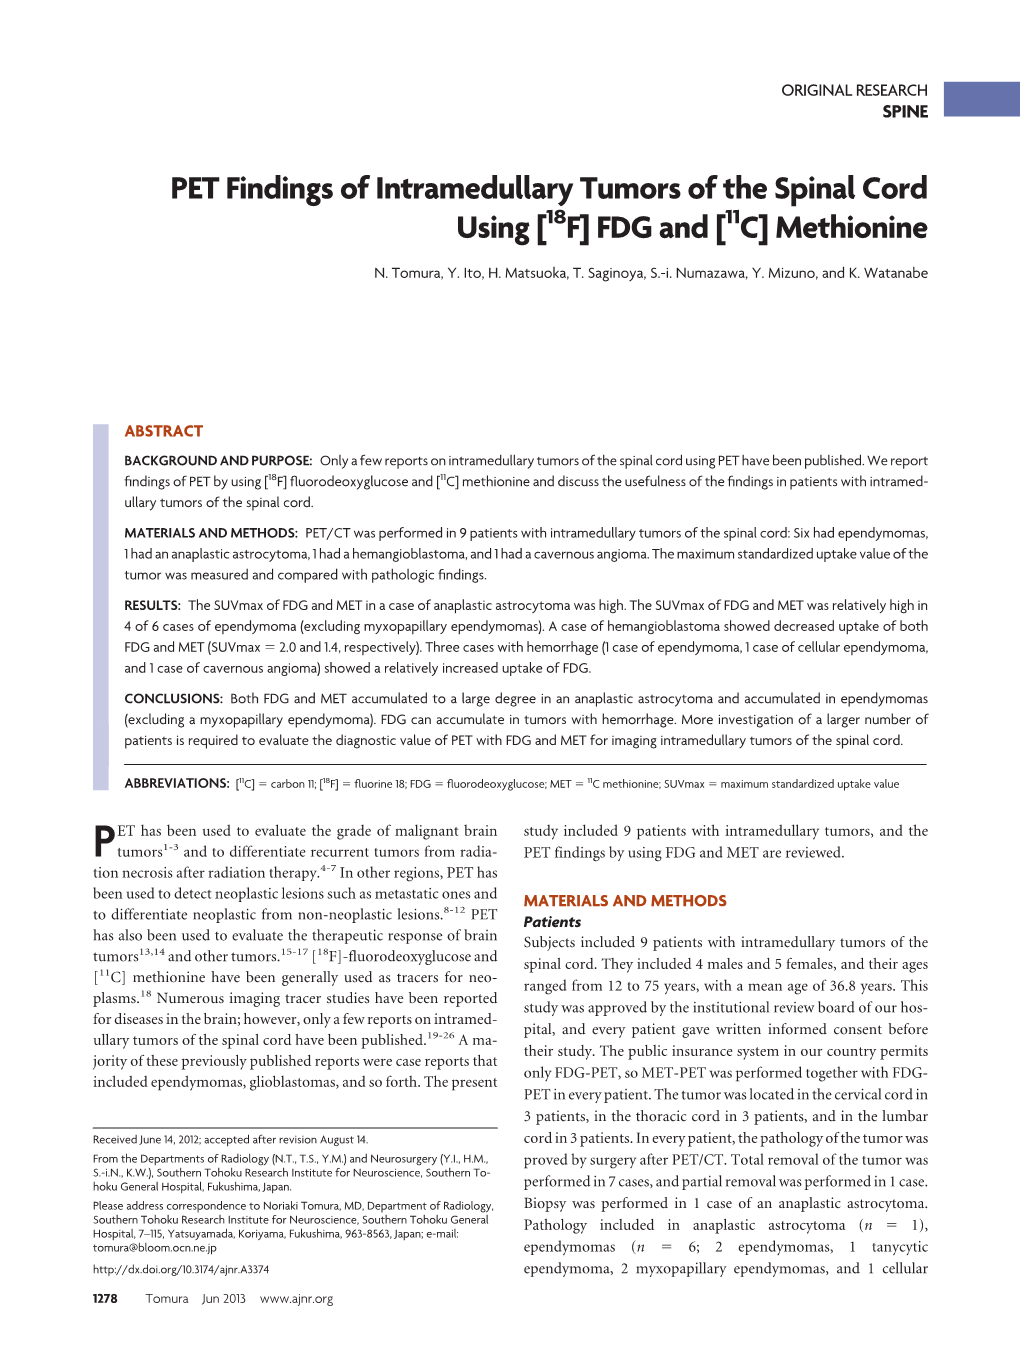 PET Findings of Intramedullary Tumors of the Spinal Cord Using [ F